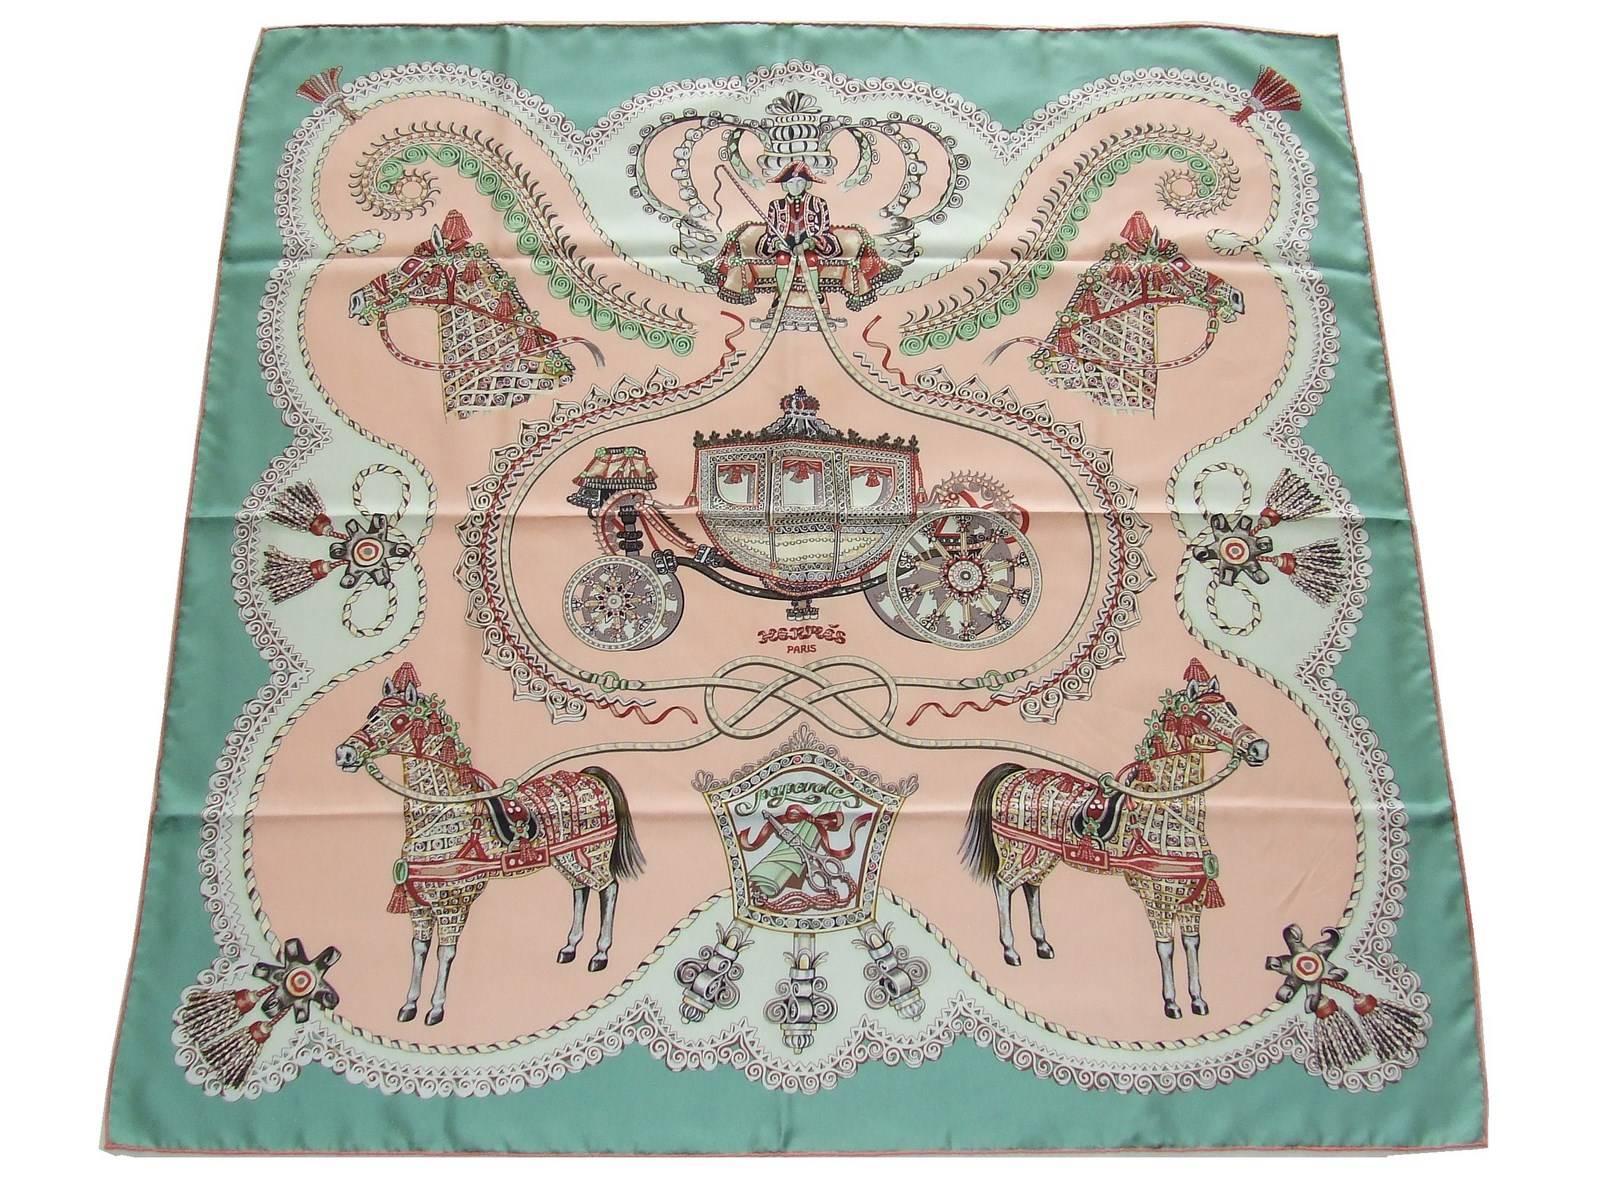 ABSOLUTELY BEAUTIFUL AUTHENTIC HERMES SCARF

Pattern: 